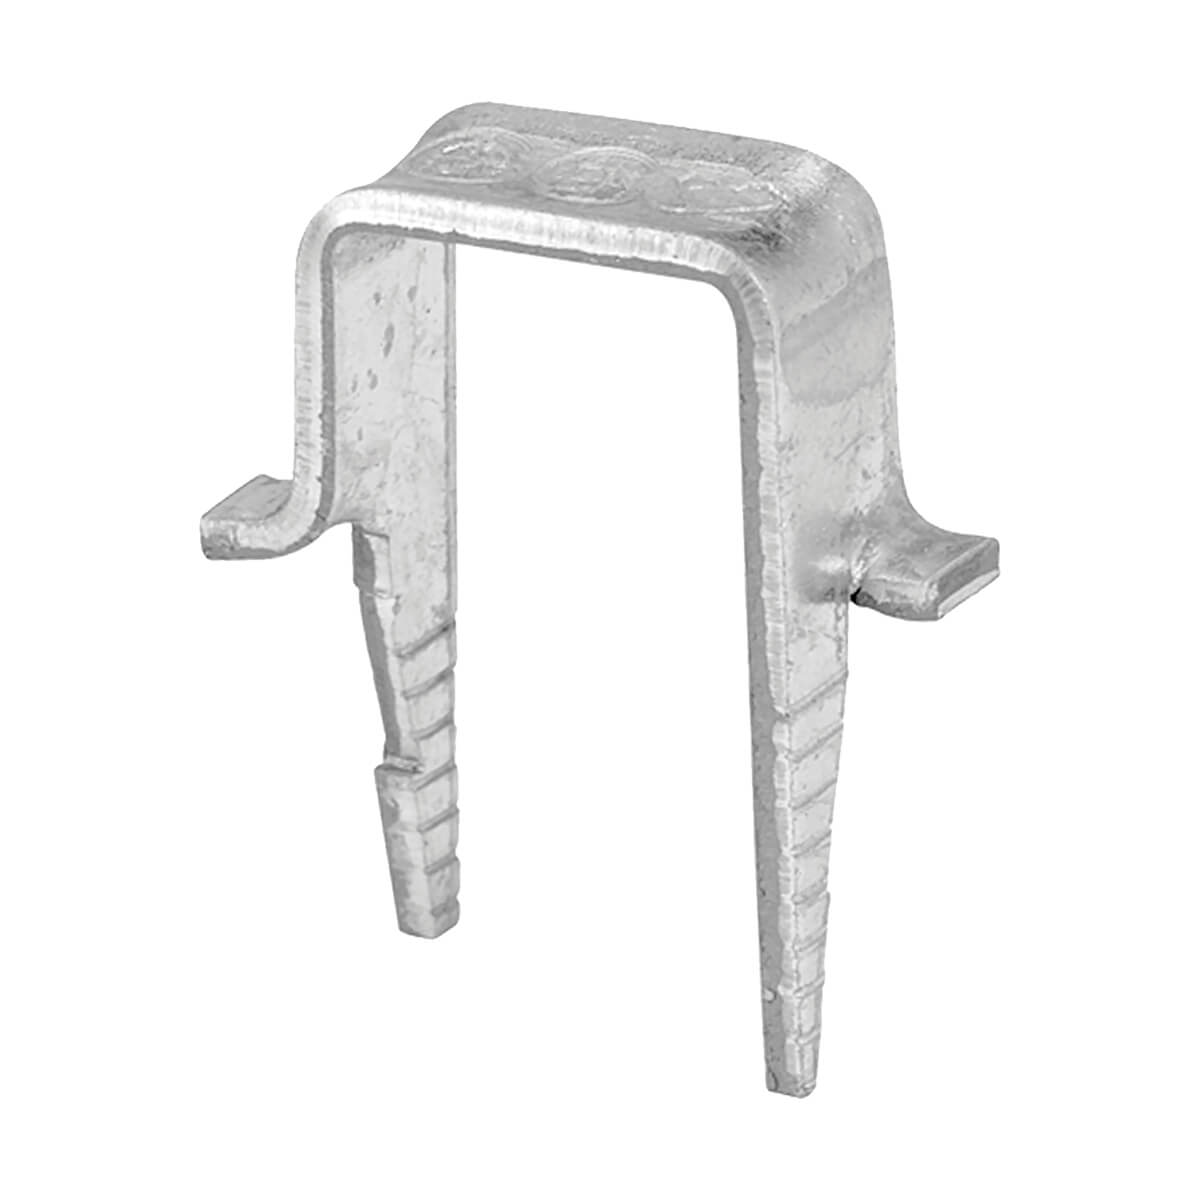 Cable Staples - Galvanized Steel - 10 Pack